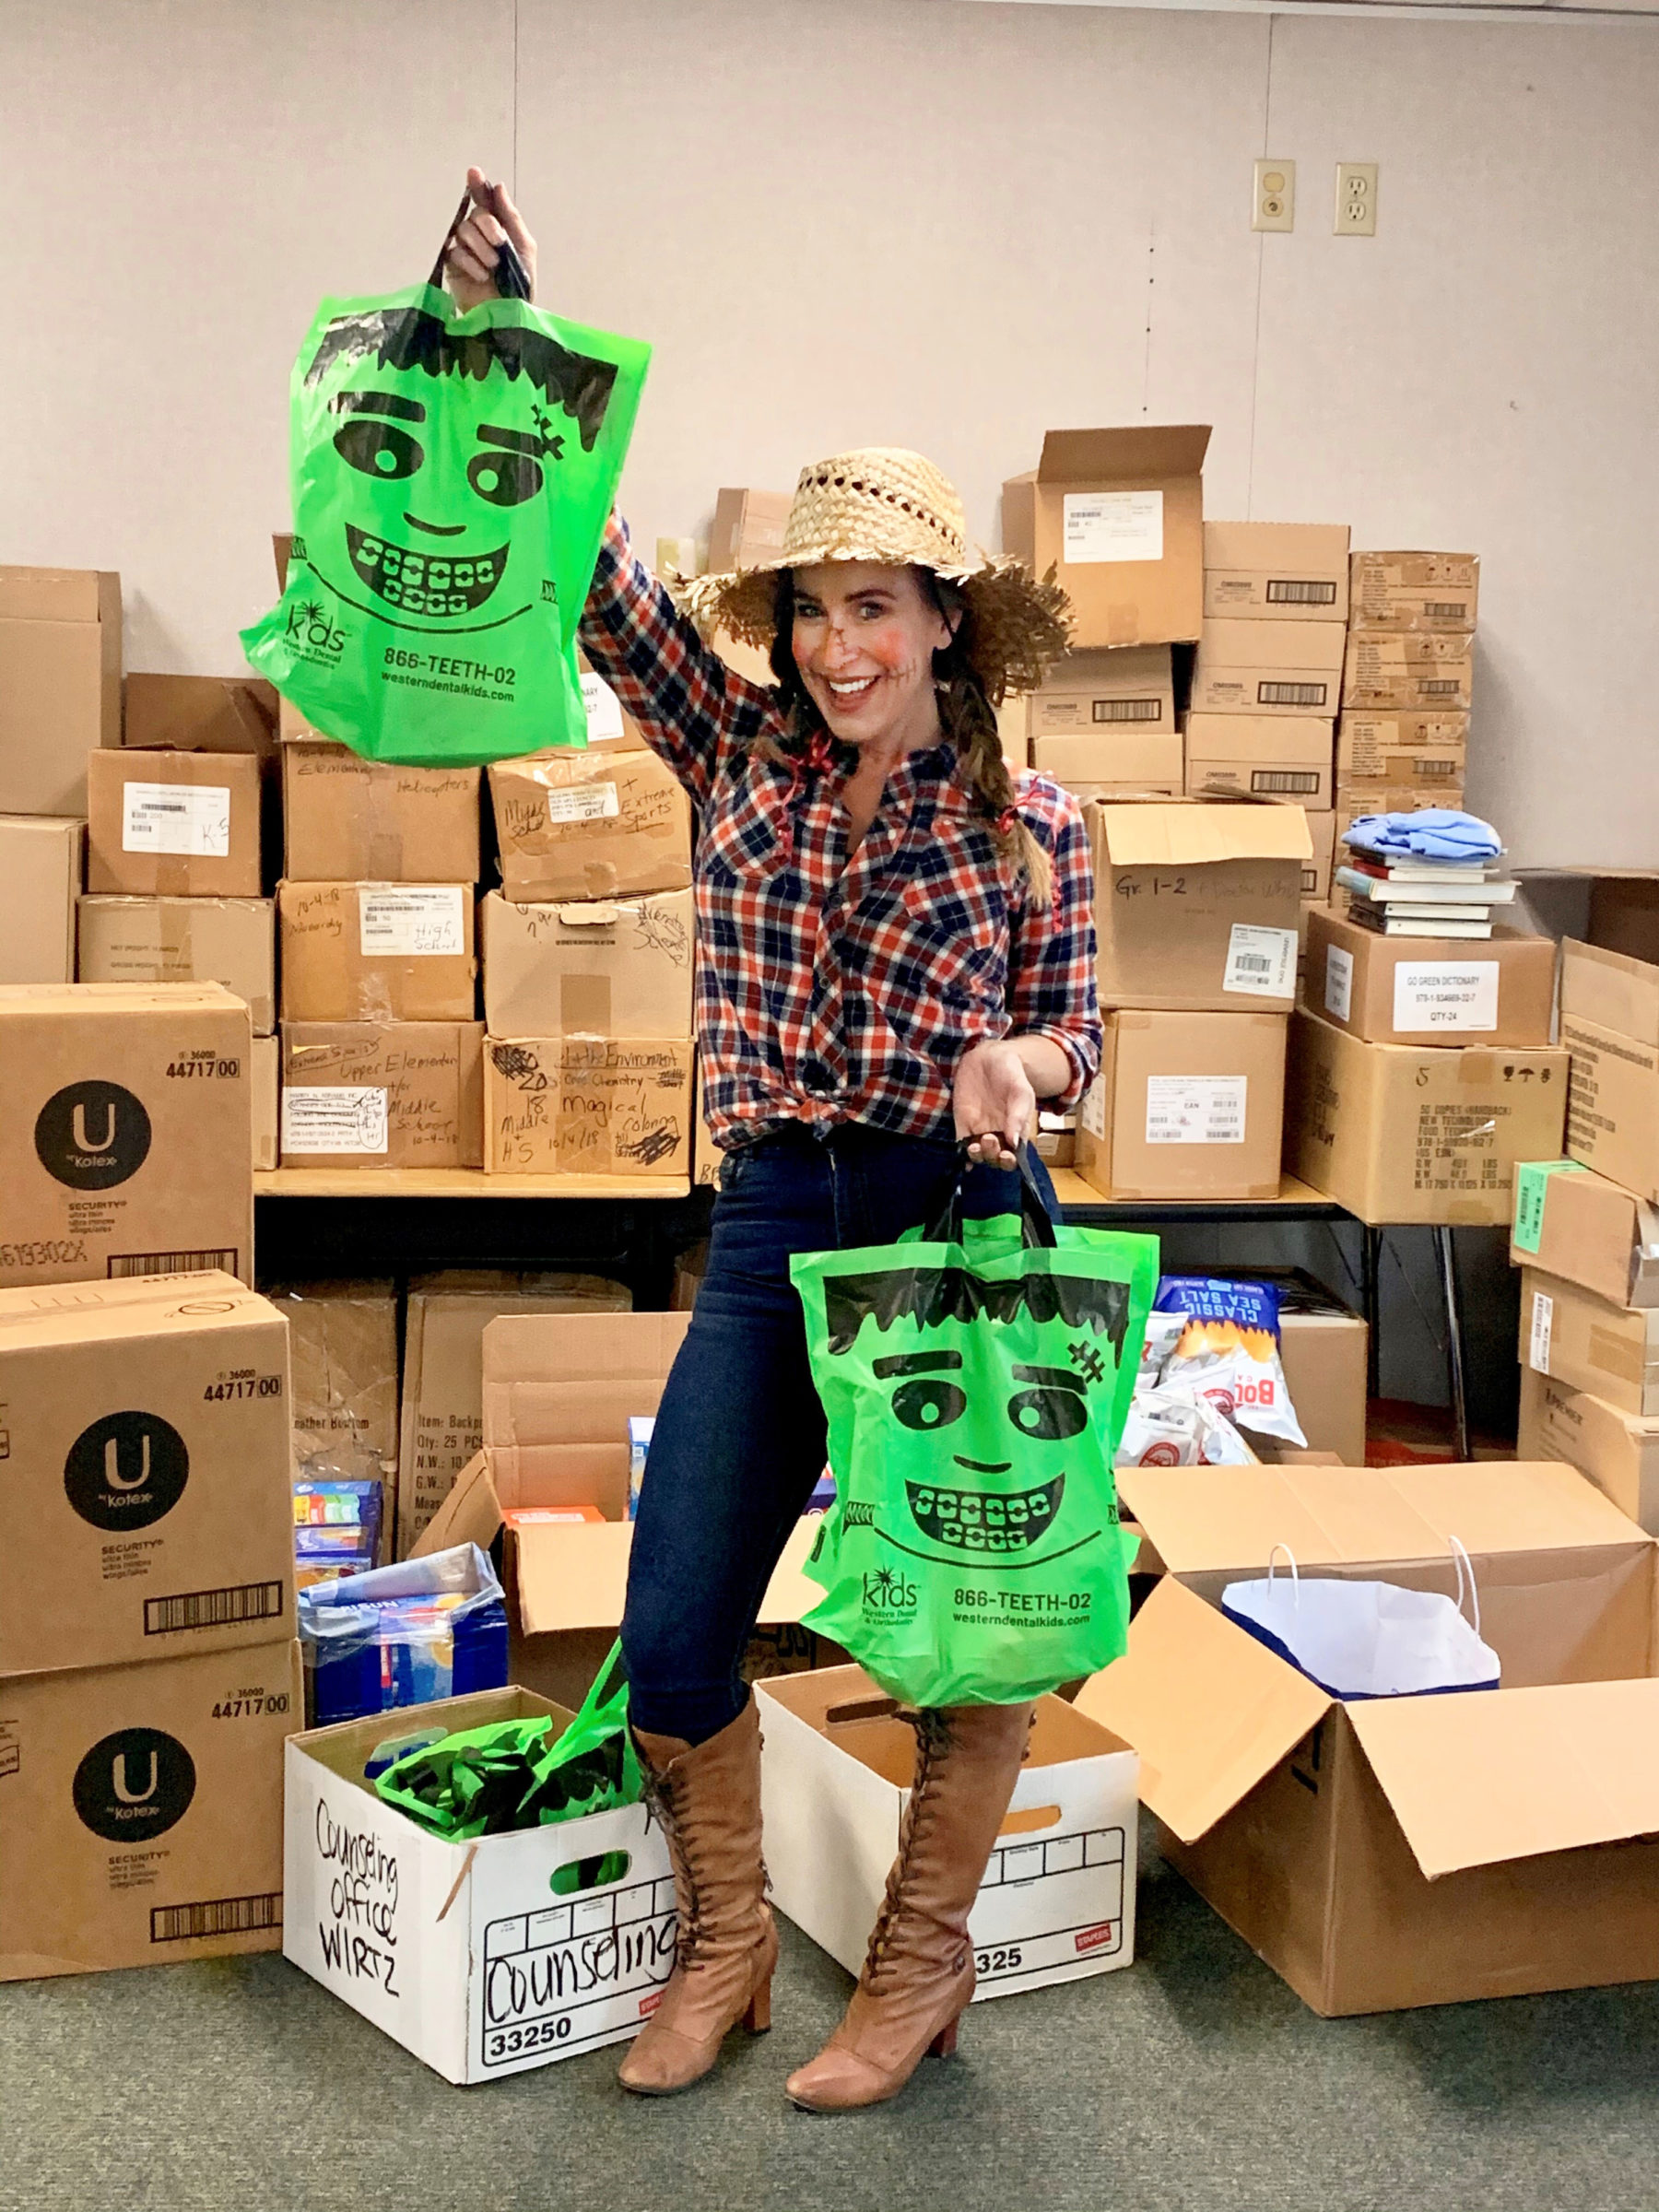 Julie White, surrounded by shelves of boxes, holding Halloween bags